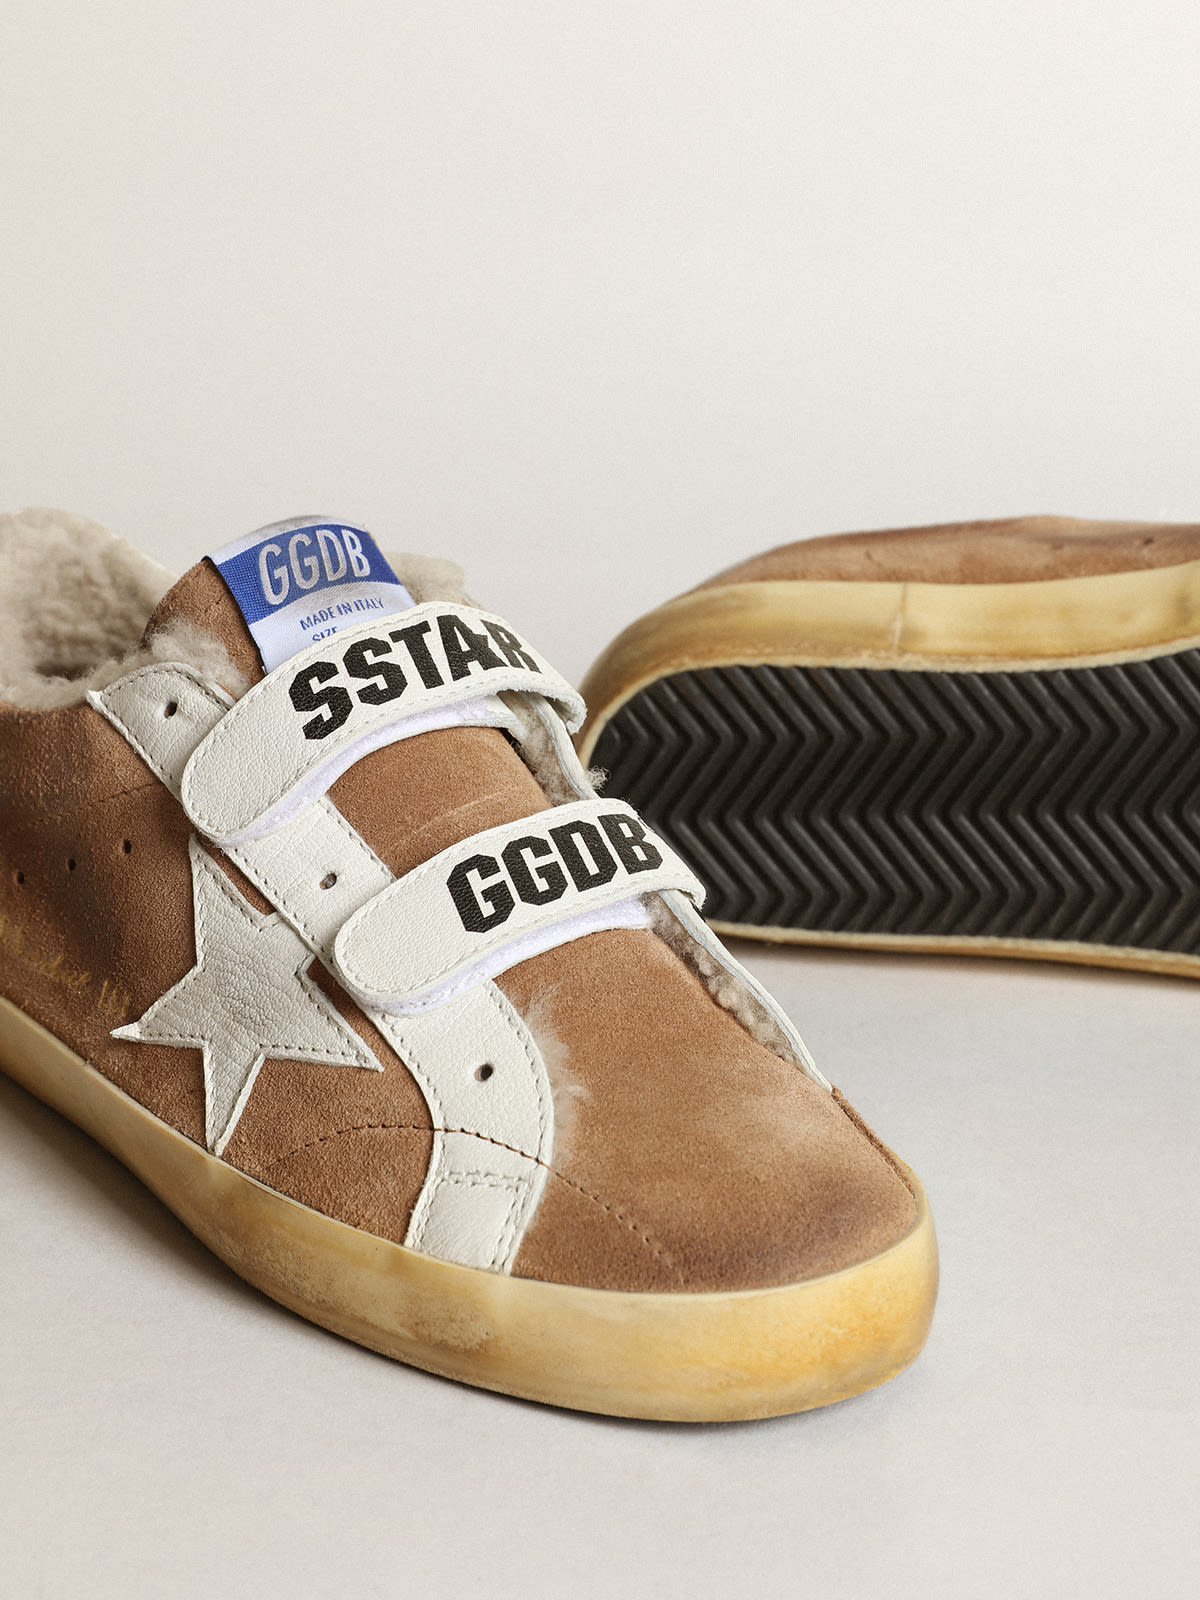 Golden Goose - Old School in tobacco suede with a white star and heel tab in 